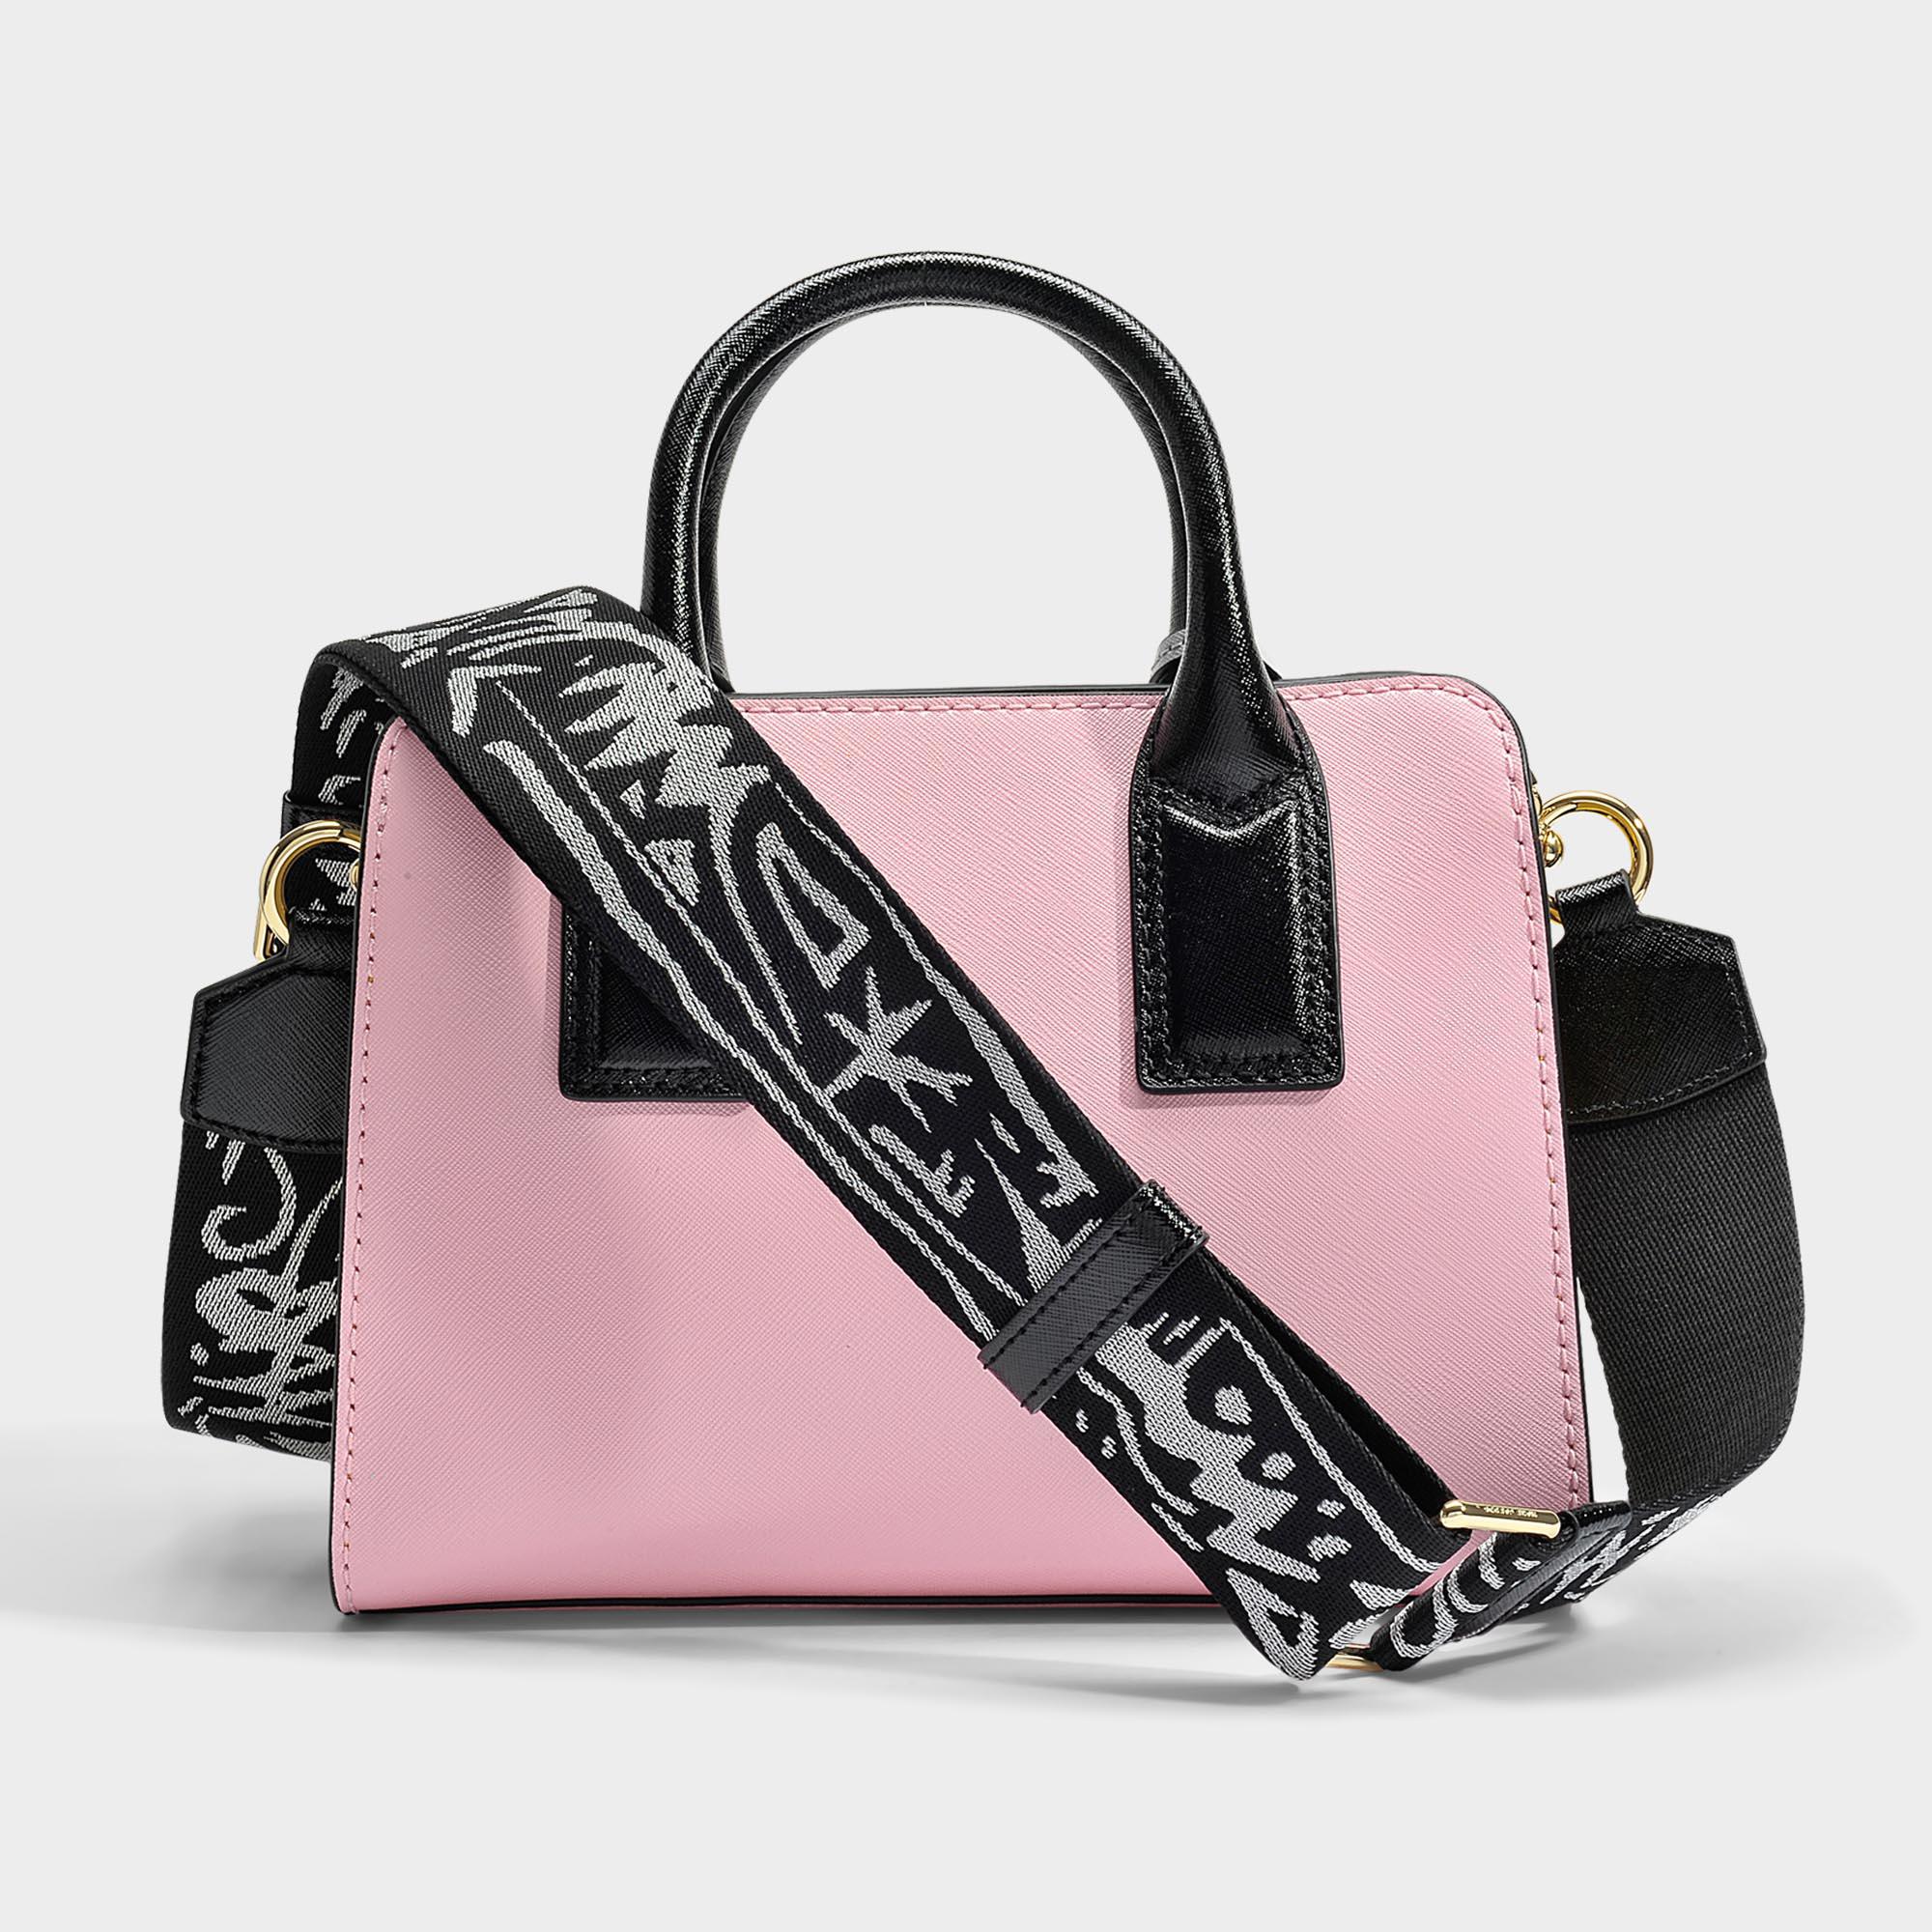 Marc Jacobs Leather Little Big Shot Tote Bag in Light Pink (Pink) - Lyst